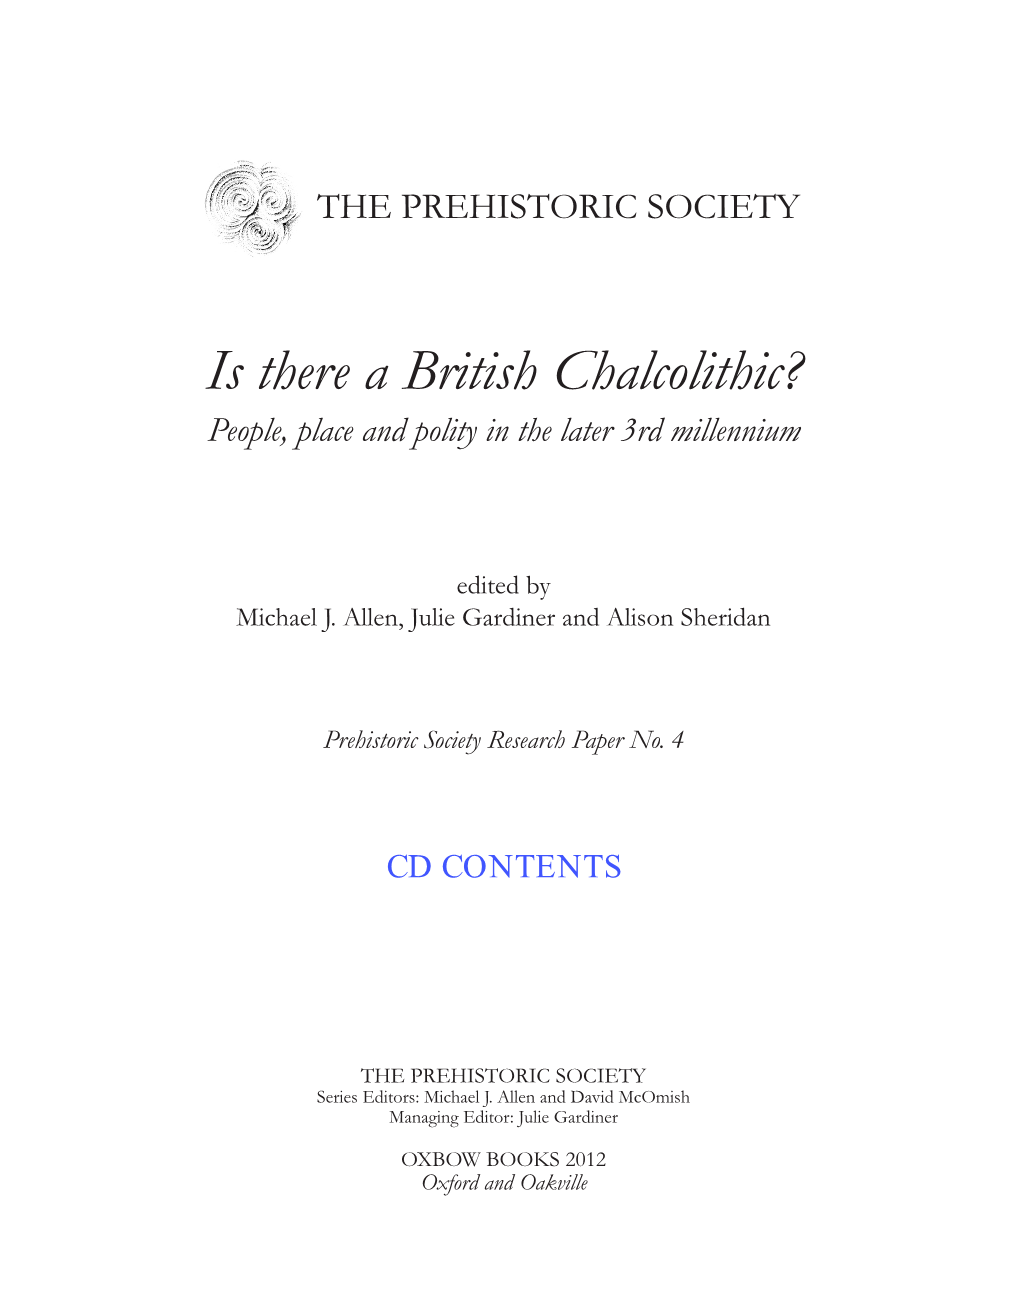 Is There a British Chalcolithic? People, Place and Polity in the Later 3Rd Millennium